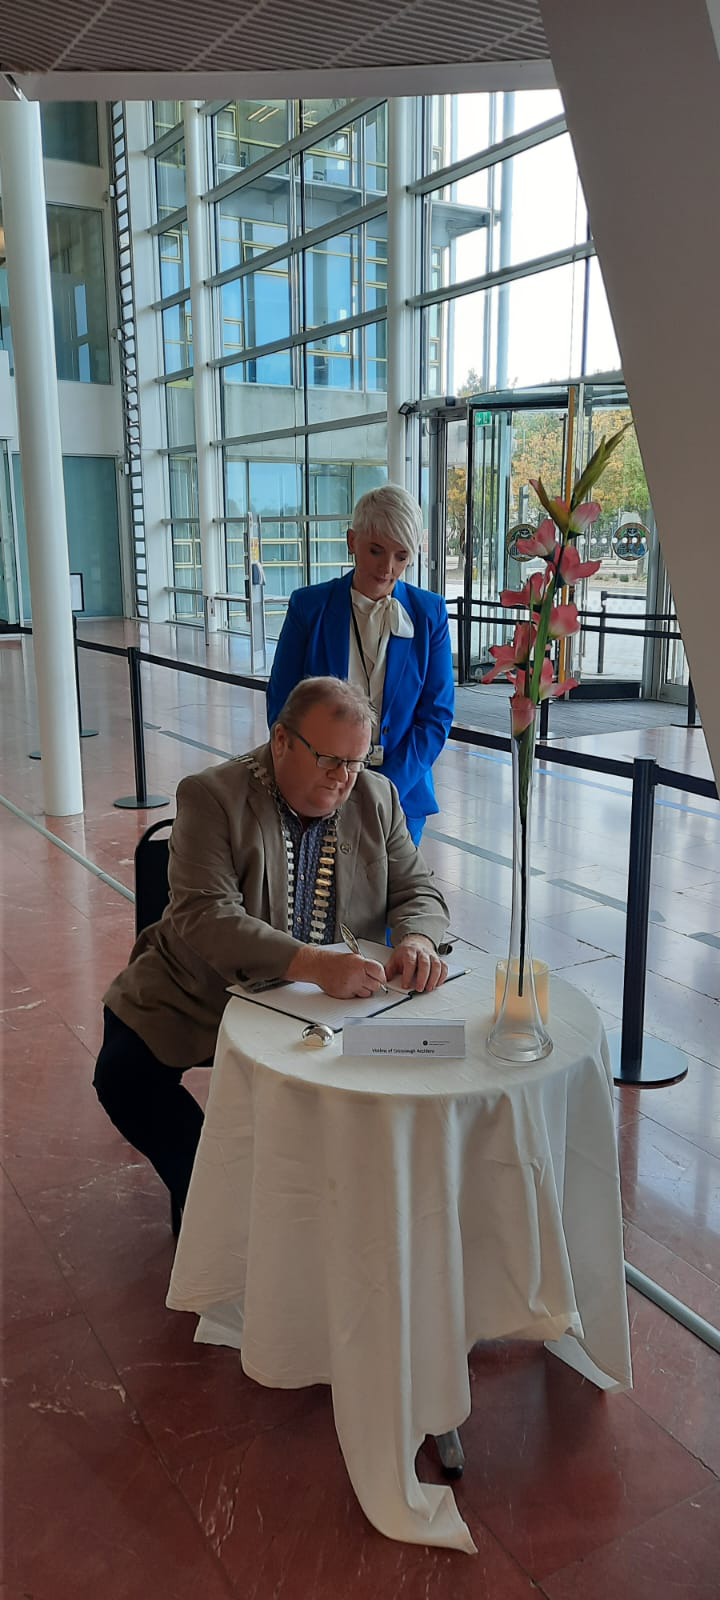 Two people signing a book